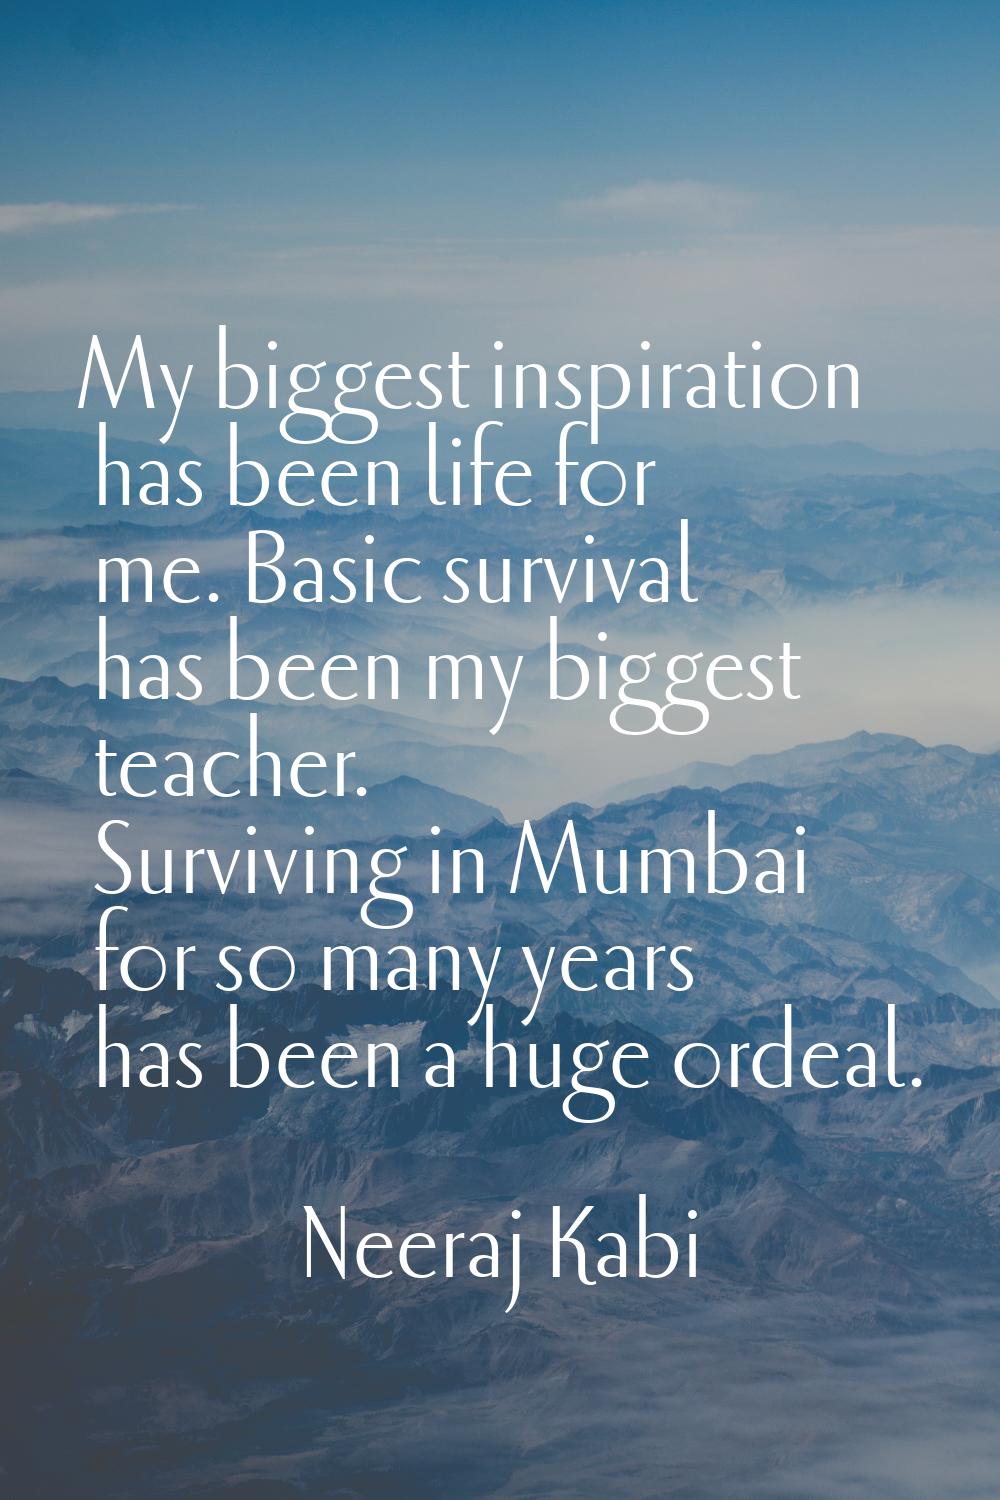 My biggest inspiration has been life for me. Basic survival has been my biggest teacher. Surviving 